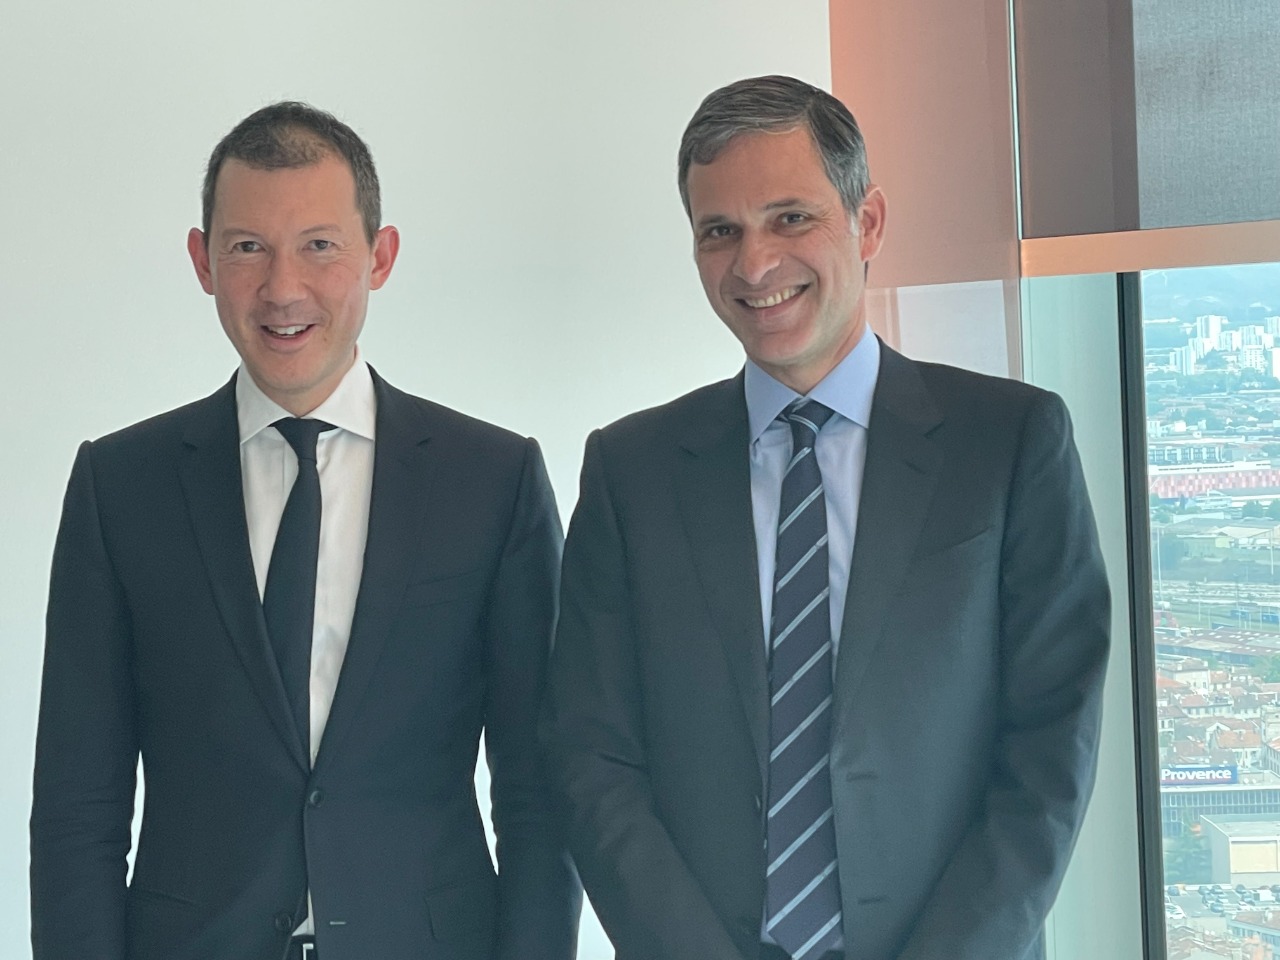   Benjamin Smith, CEO, Air France-KLM Group and Rodolphe Saadé, Chairman and CEO of the CMA CGM Group